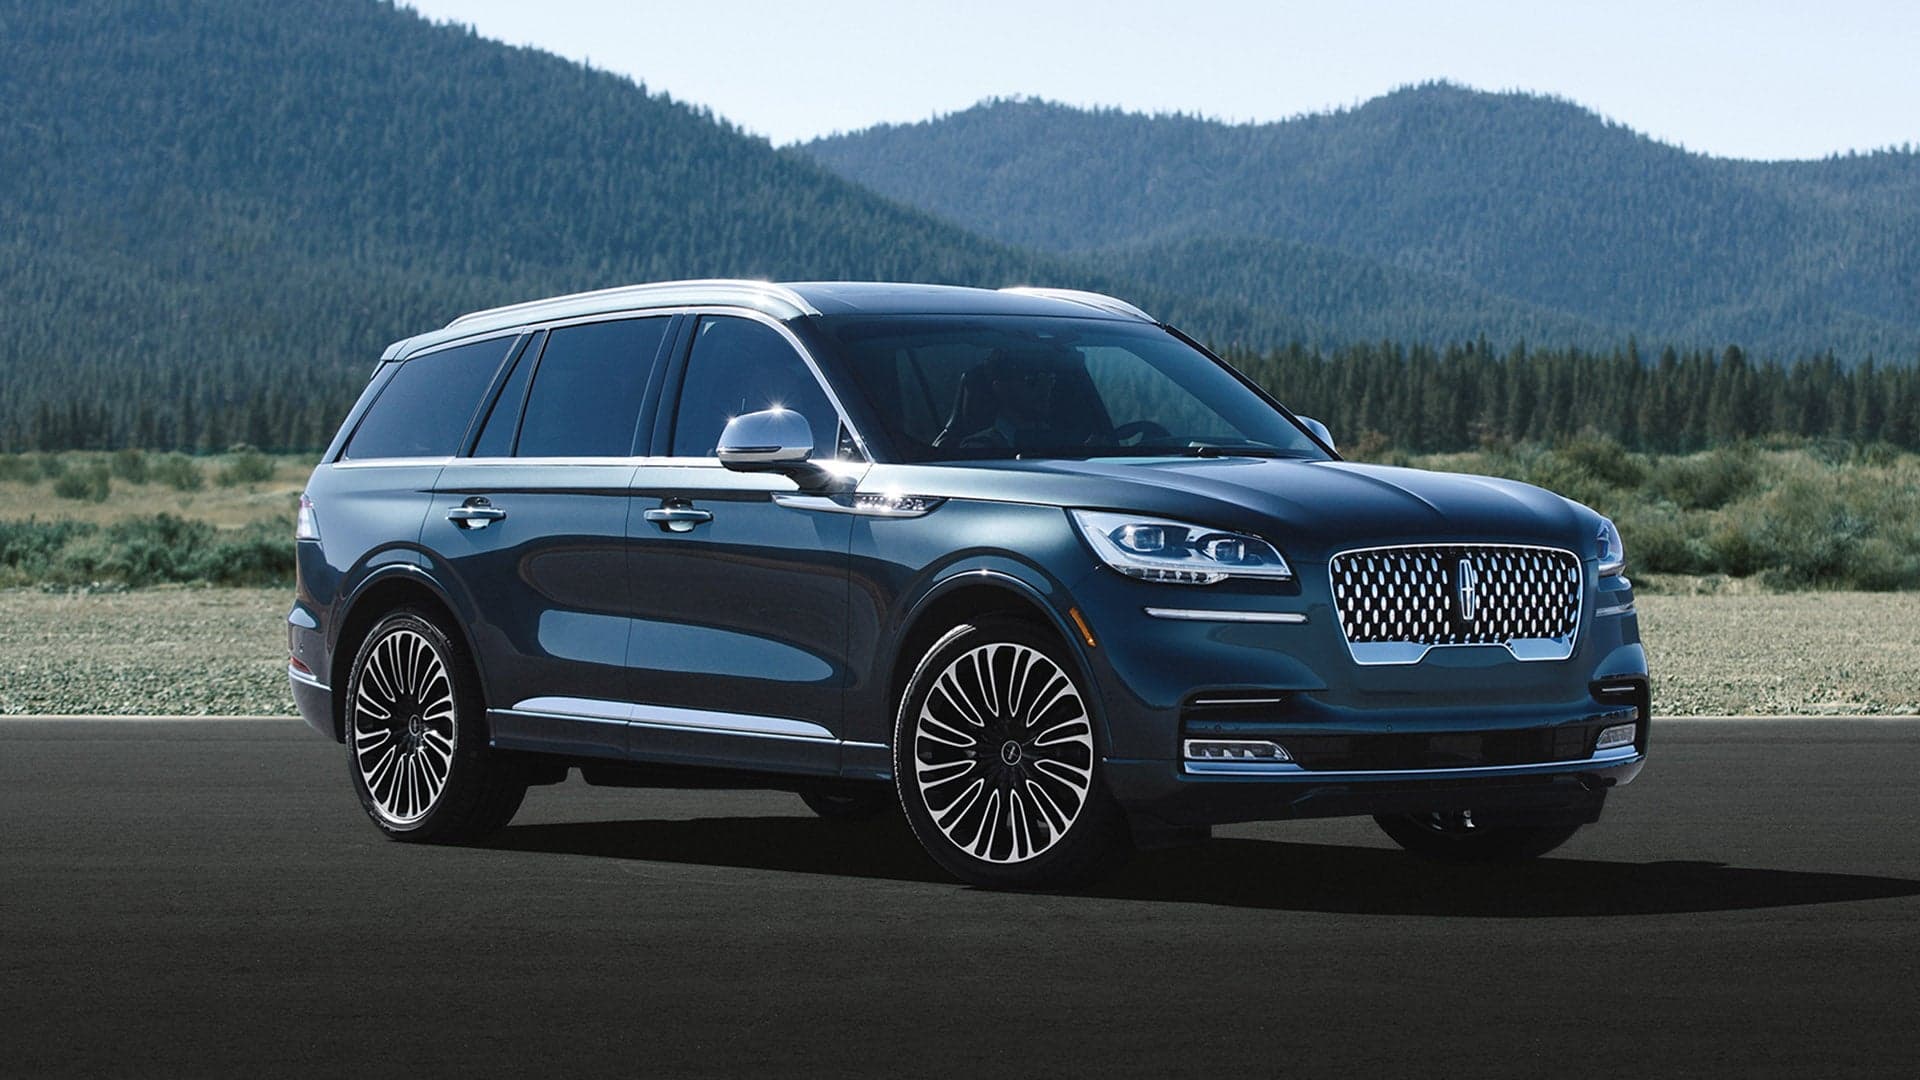 The 450-HP 2020 Lincoln Aviator SUV Is a Classic Vision of Modern American Luxury